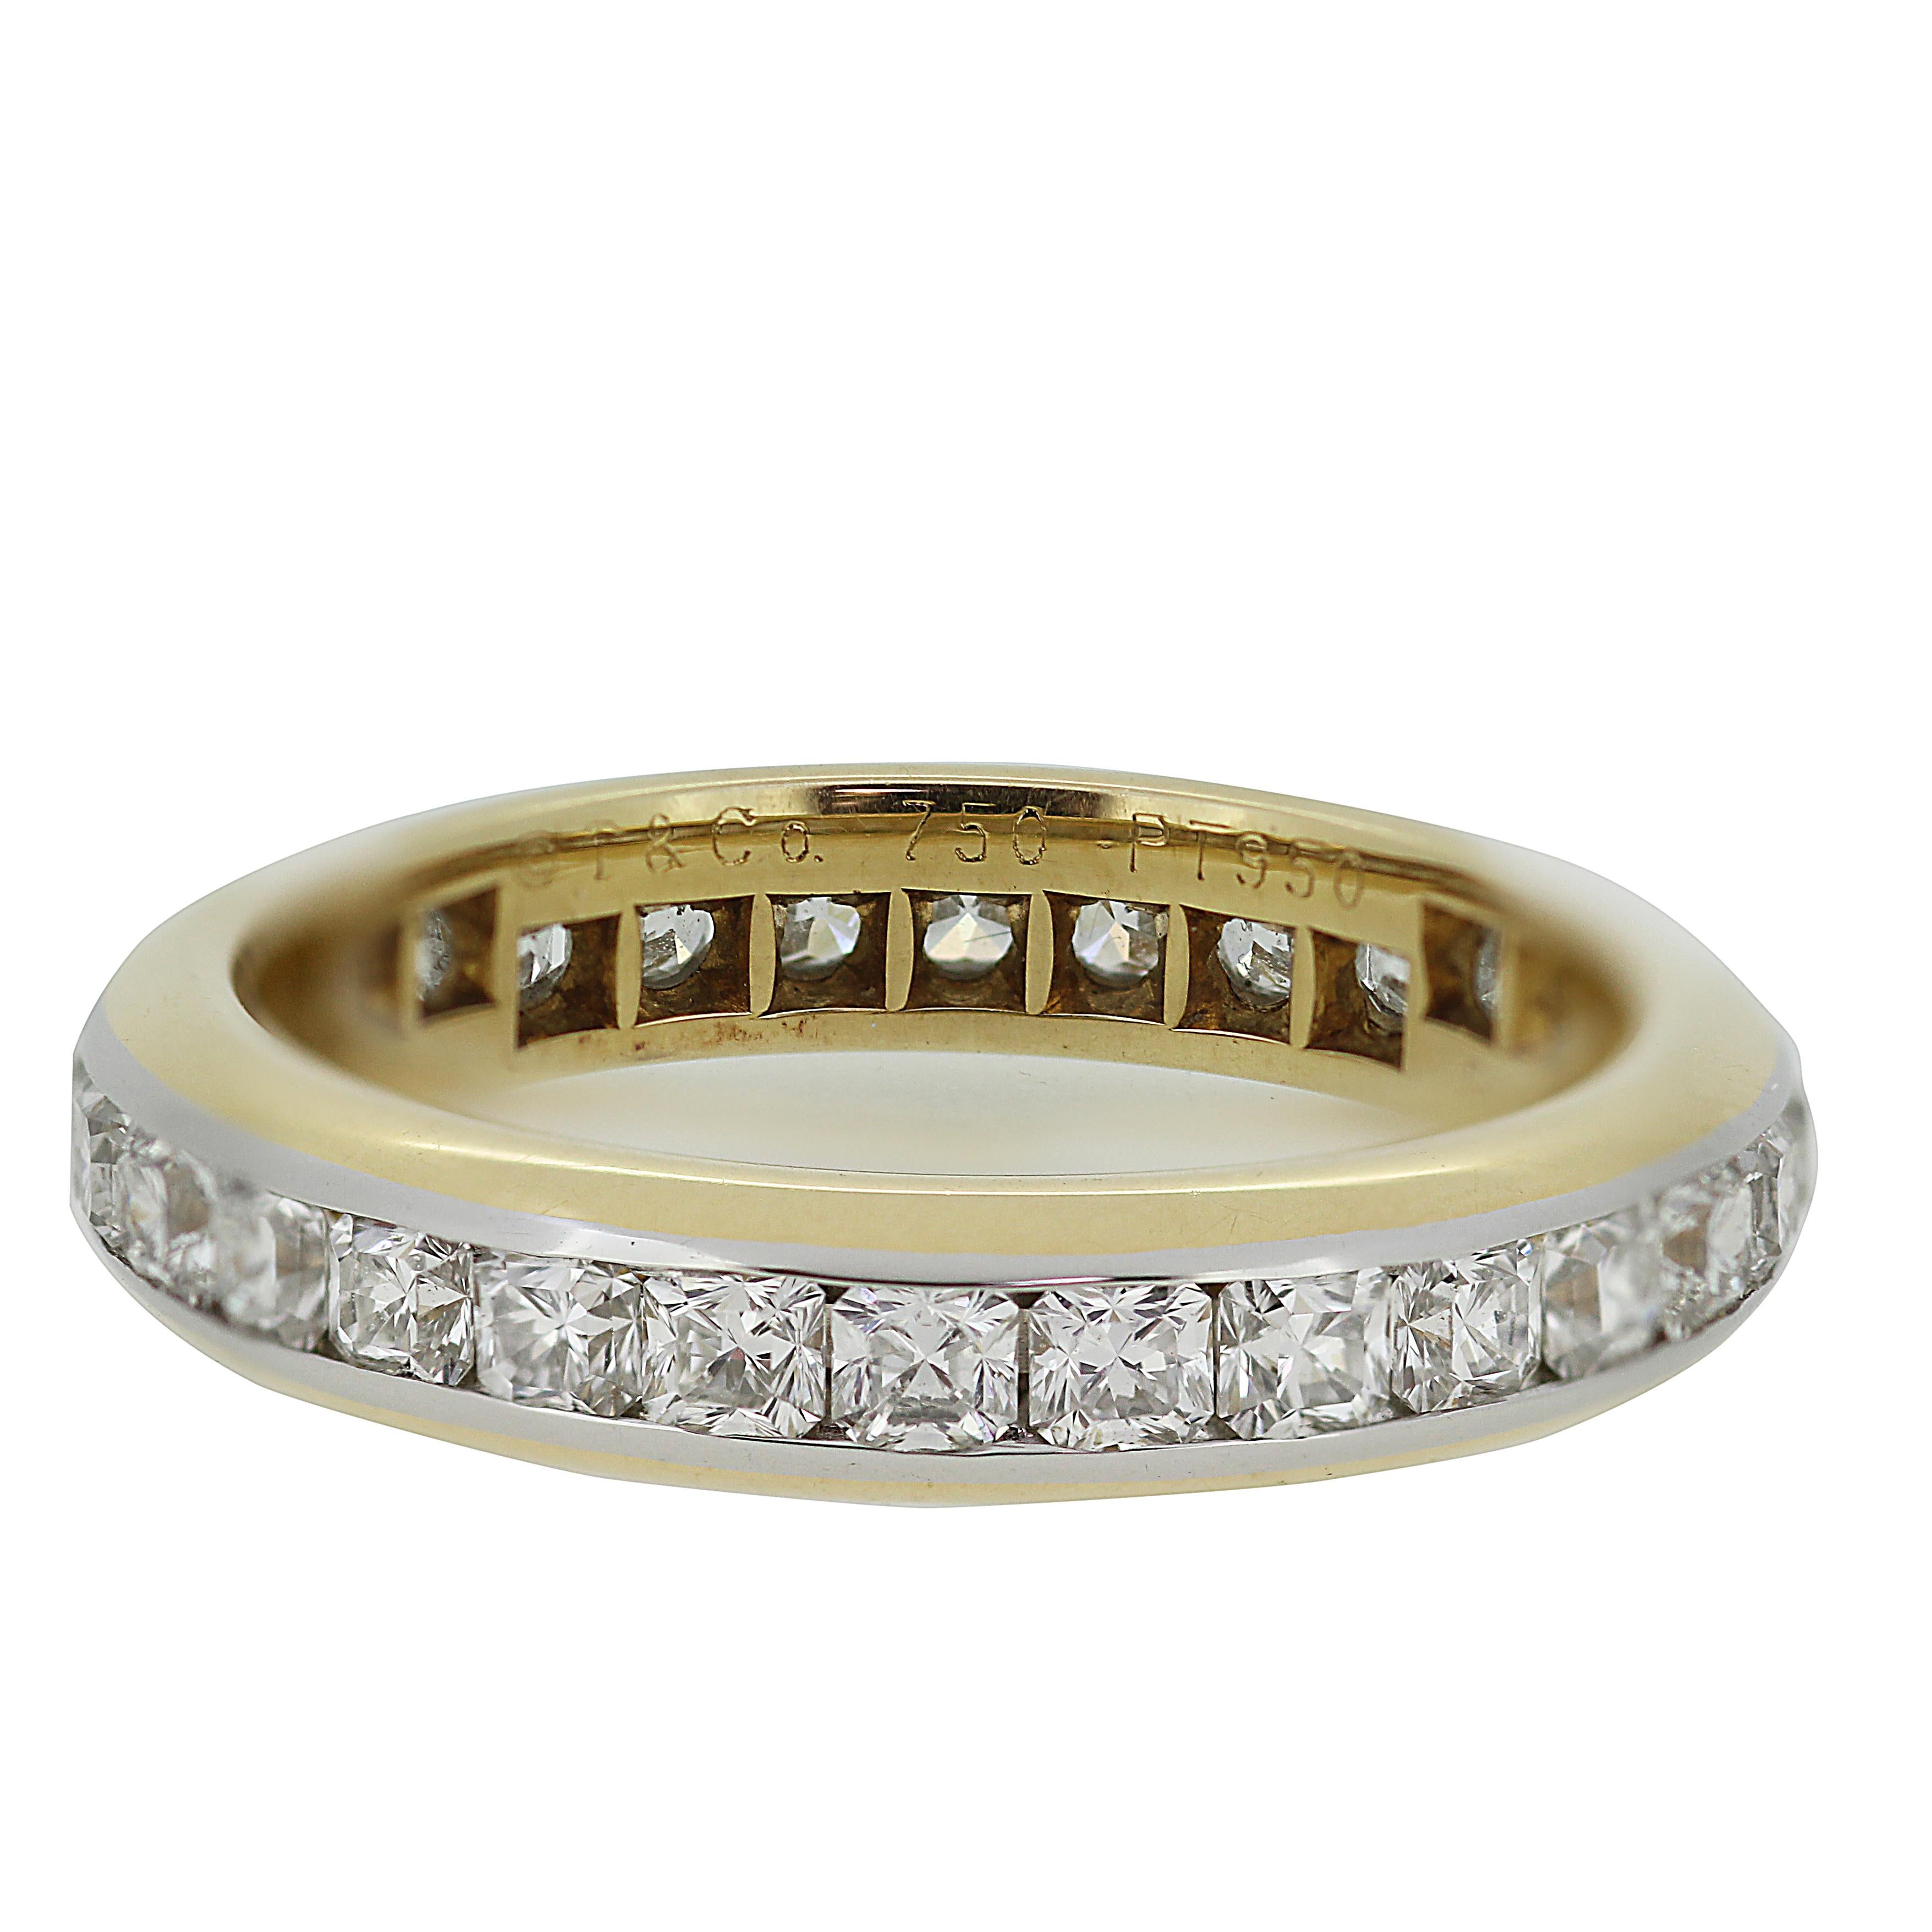 A gorgeous Lucida full eternity ring in 18ct gold and platinum by Tiffany & Co. The ring is set through the centre with 28 Lucida brilliant-cut diamonds.
Total diamond weight 1.37 ct. Assessed colour G/H, Assessed clarity VS. 
The ring comes